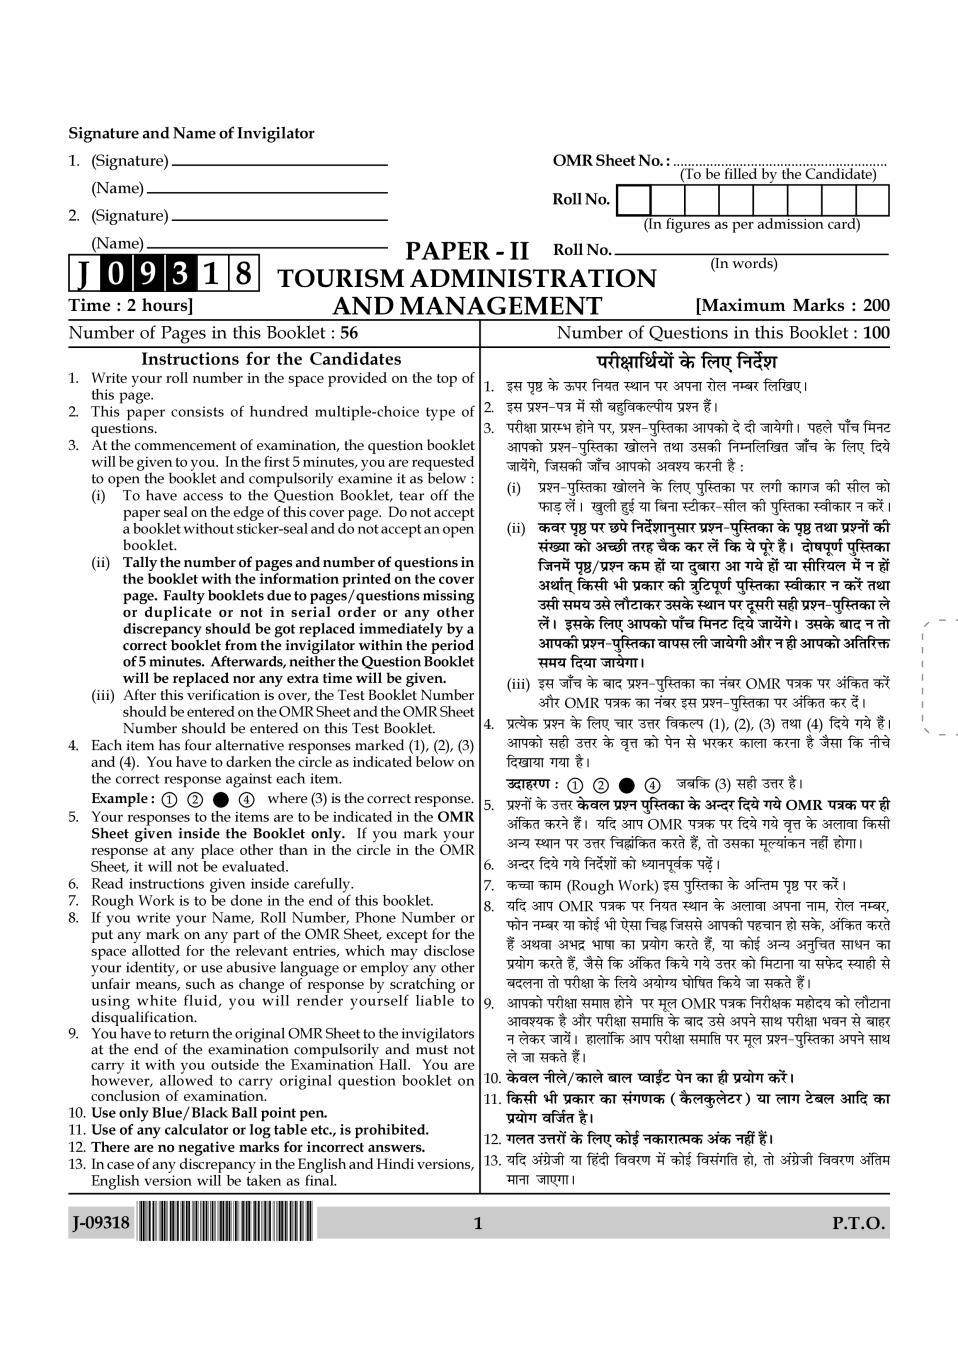 UGC NET Tourism Administration and Management Question Paper 2018 - Page 1